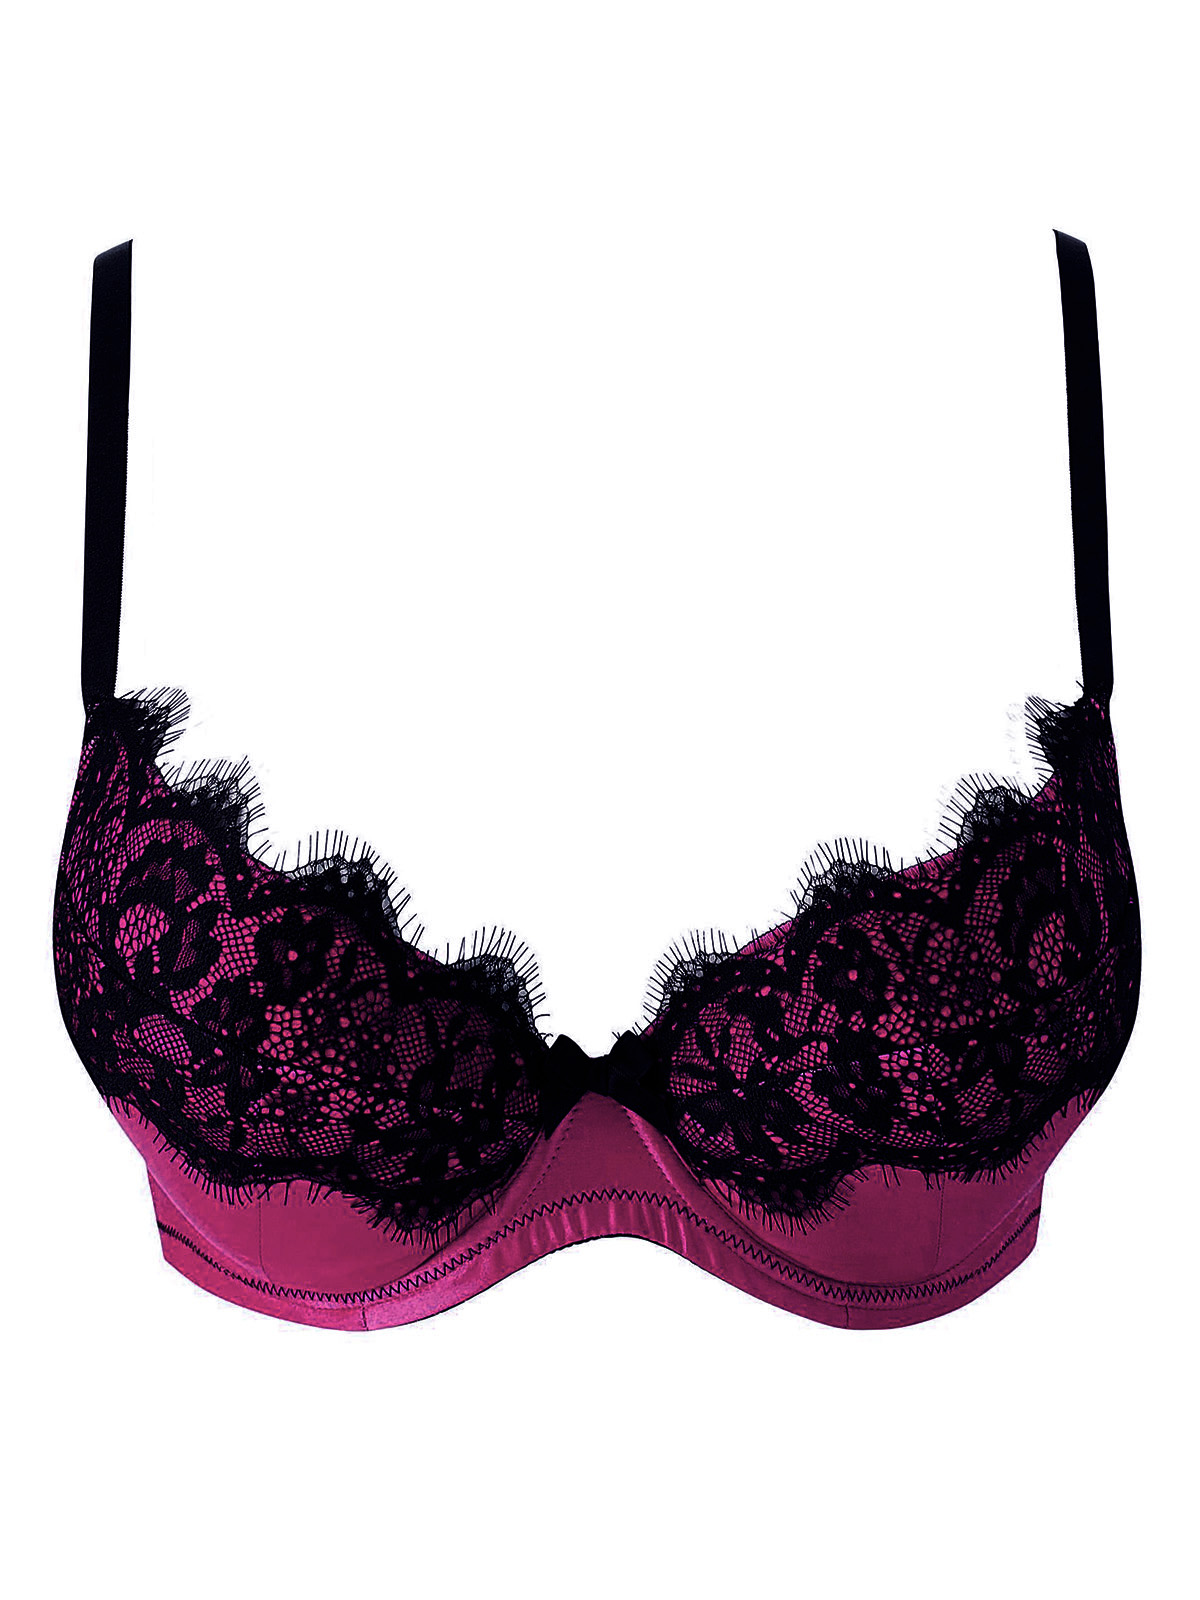 The Passion Underwired Padded Plunge Bra by Ann Summers